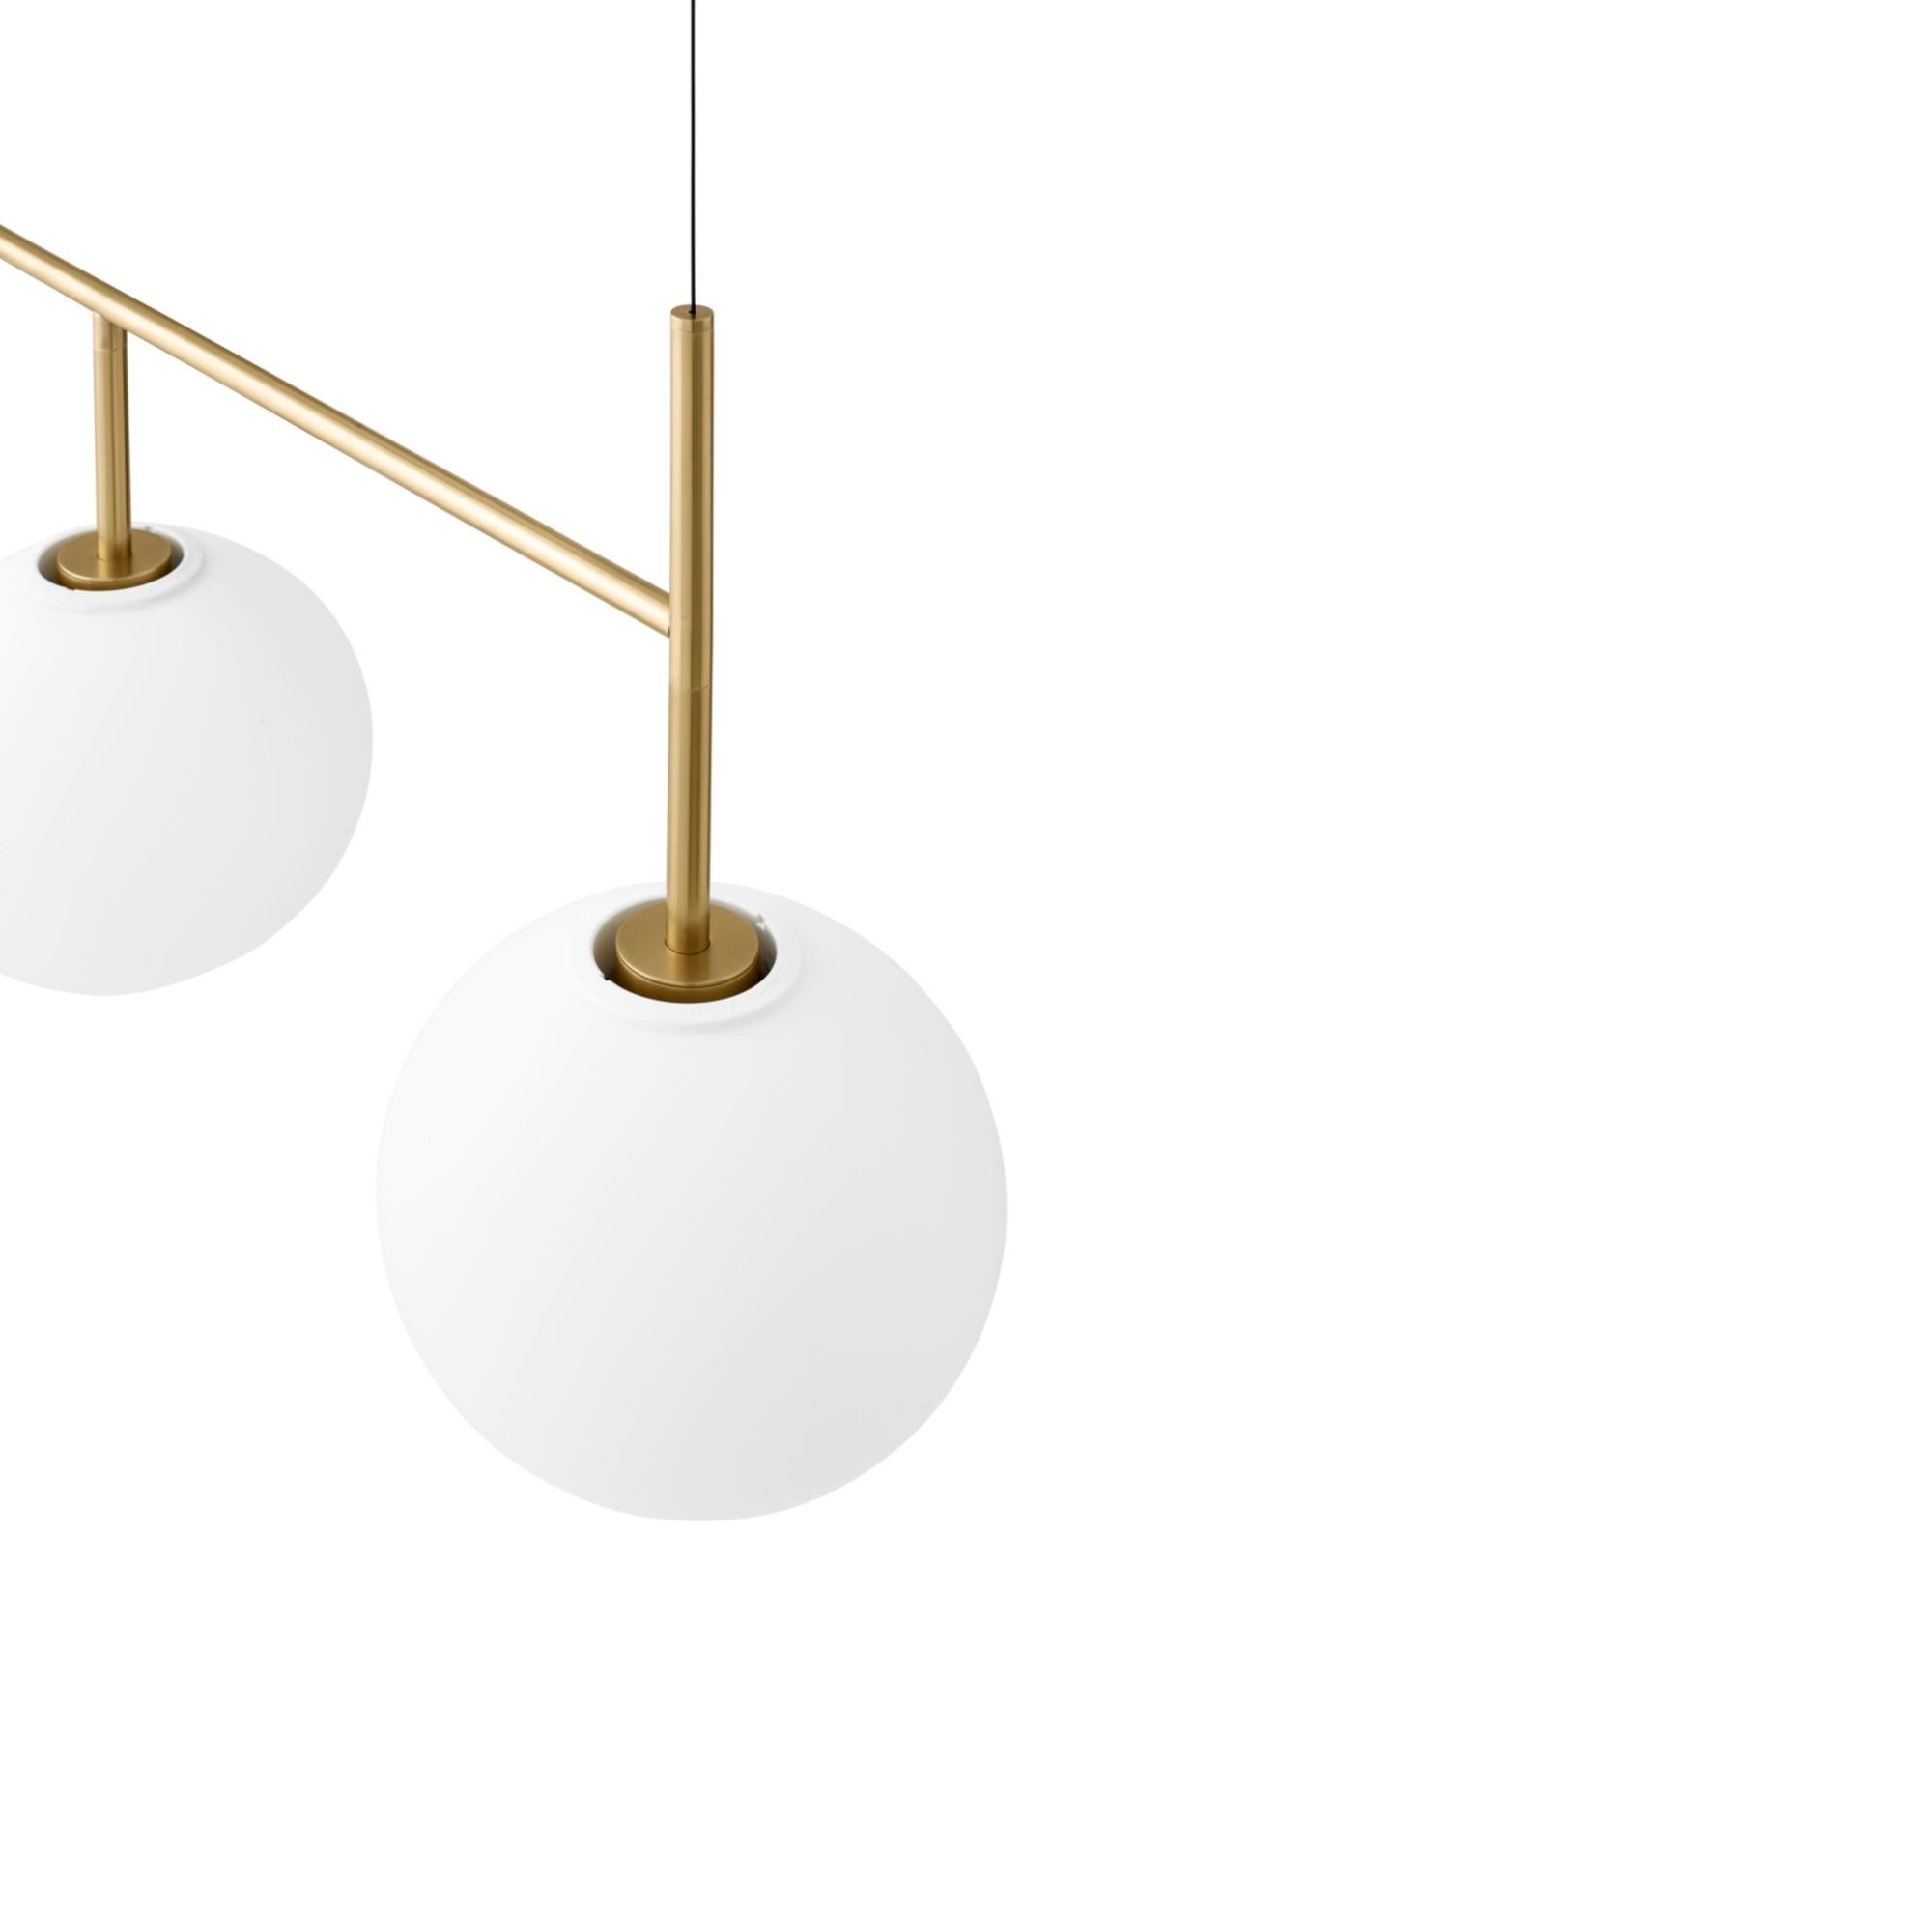 Designed for longevity, TR Bulb uses LED technology, which, with normal use, should last many years. The globe is constructed from white opal glass, and the core structure is made from aluminium to draw heat away from the LED, allowing the bulb to